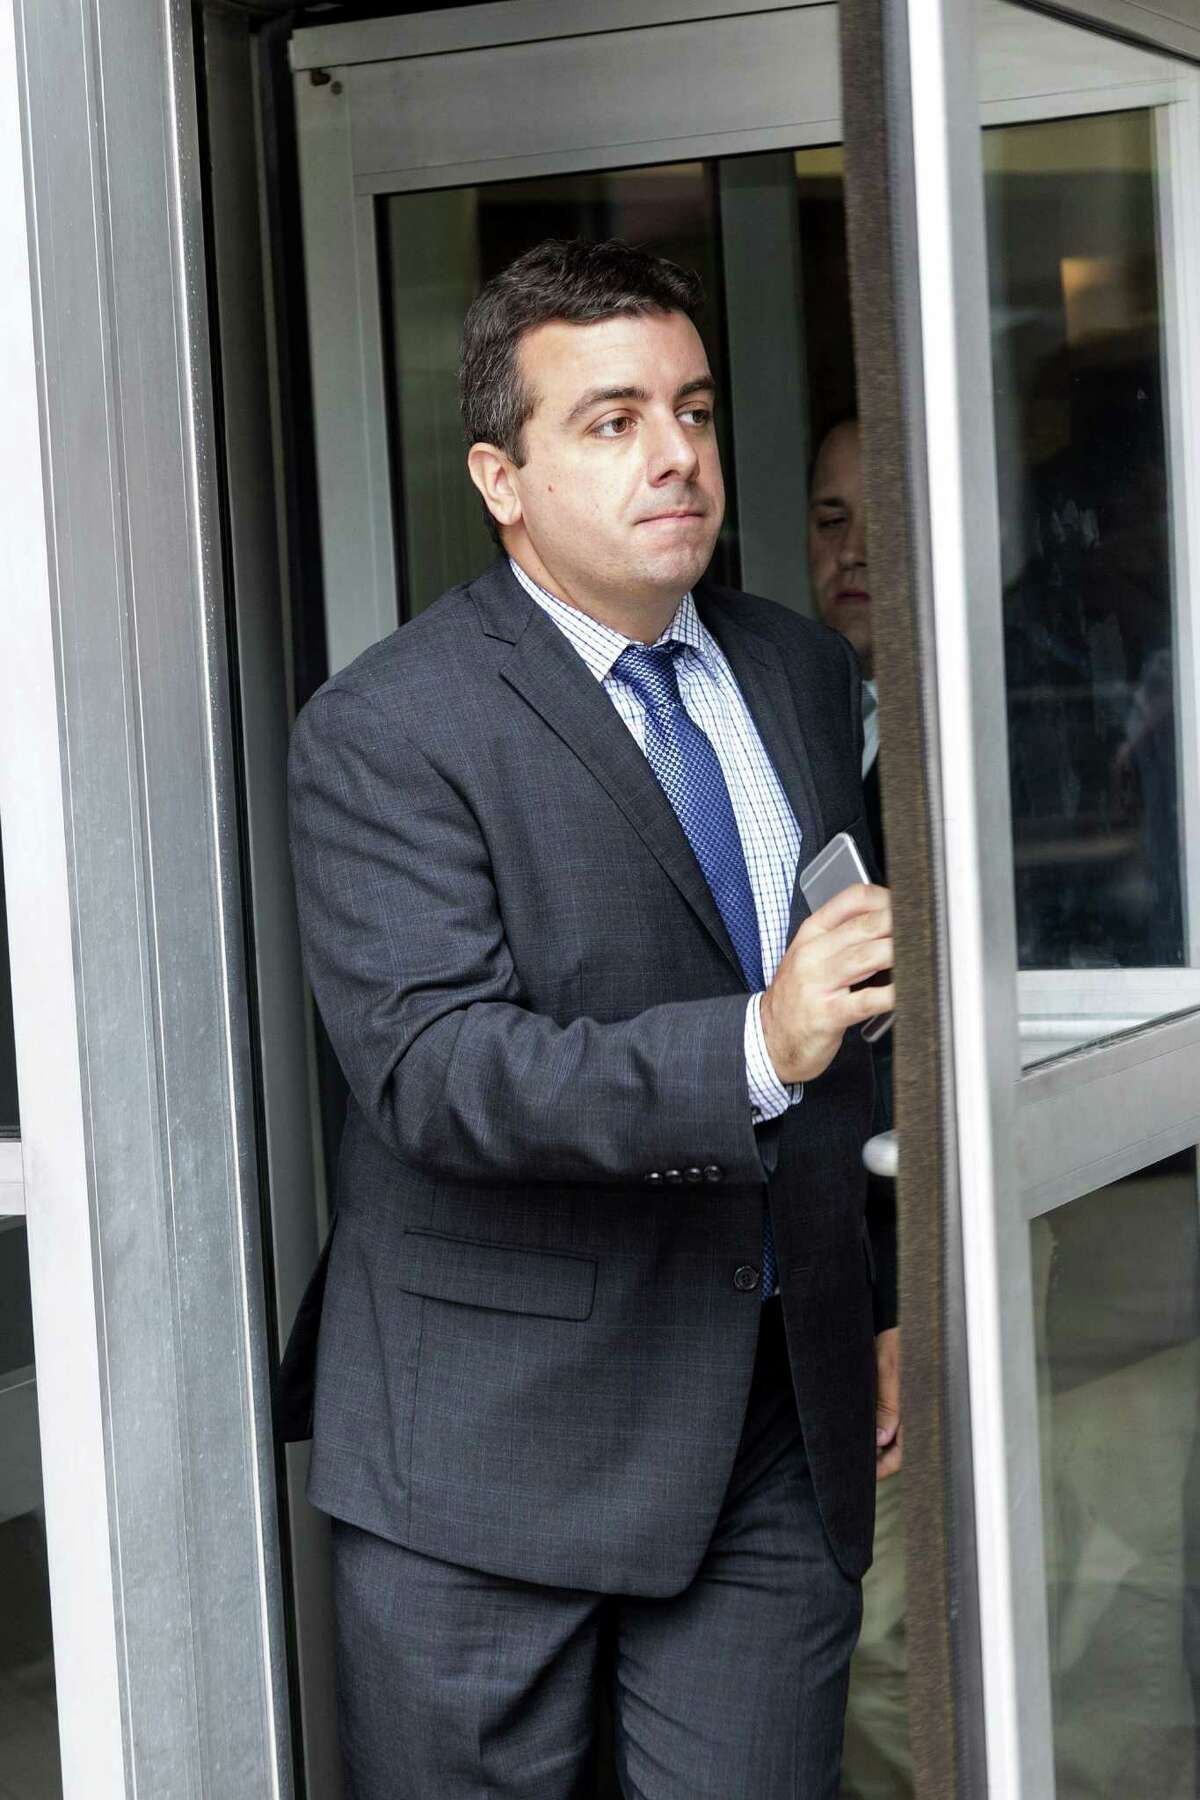 Christopher Correa, former St. Louis Cardinals scouting director, leaves the Bob Casey Federal Courthouse in Houston, Texas, U.S., on Monday, July 18, 2016. Correa pleaded guilty in January to hacking into the Houston Astros’ “Ground Control” database to steal private reports and player trade details, according to U.S. Justice Department. Photographer: F. Carter Smith/Bloomberg